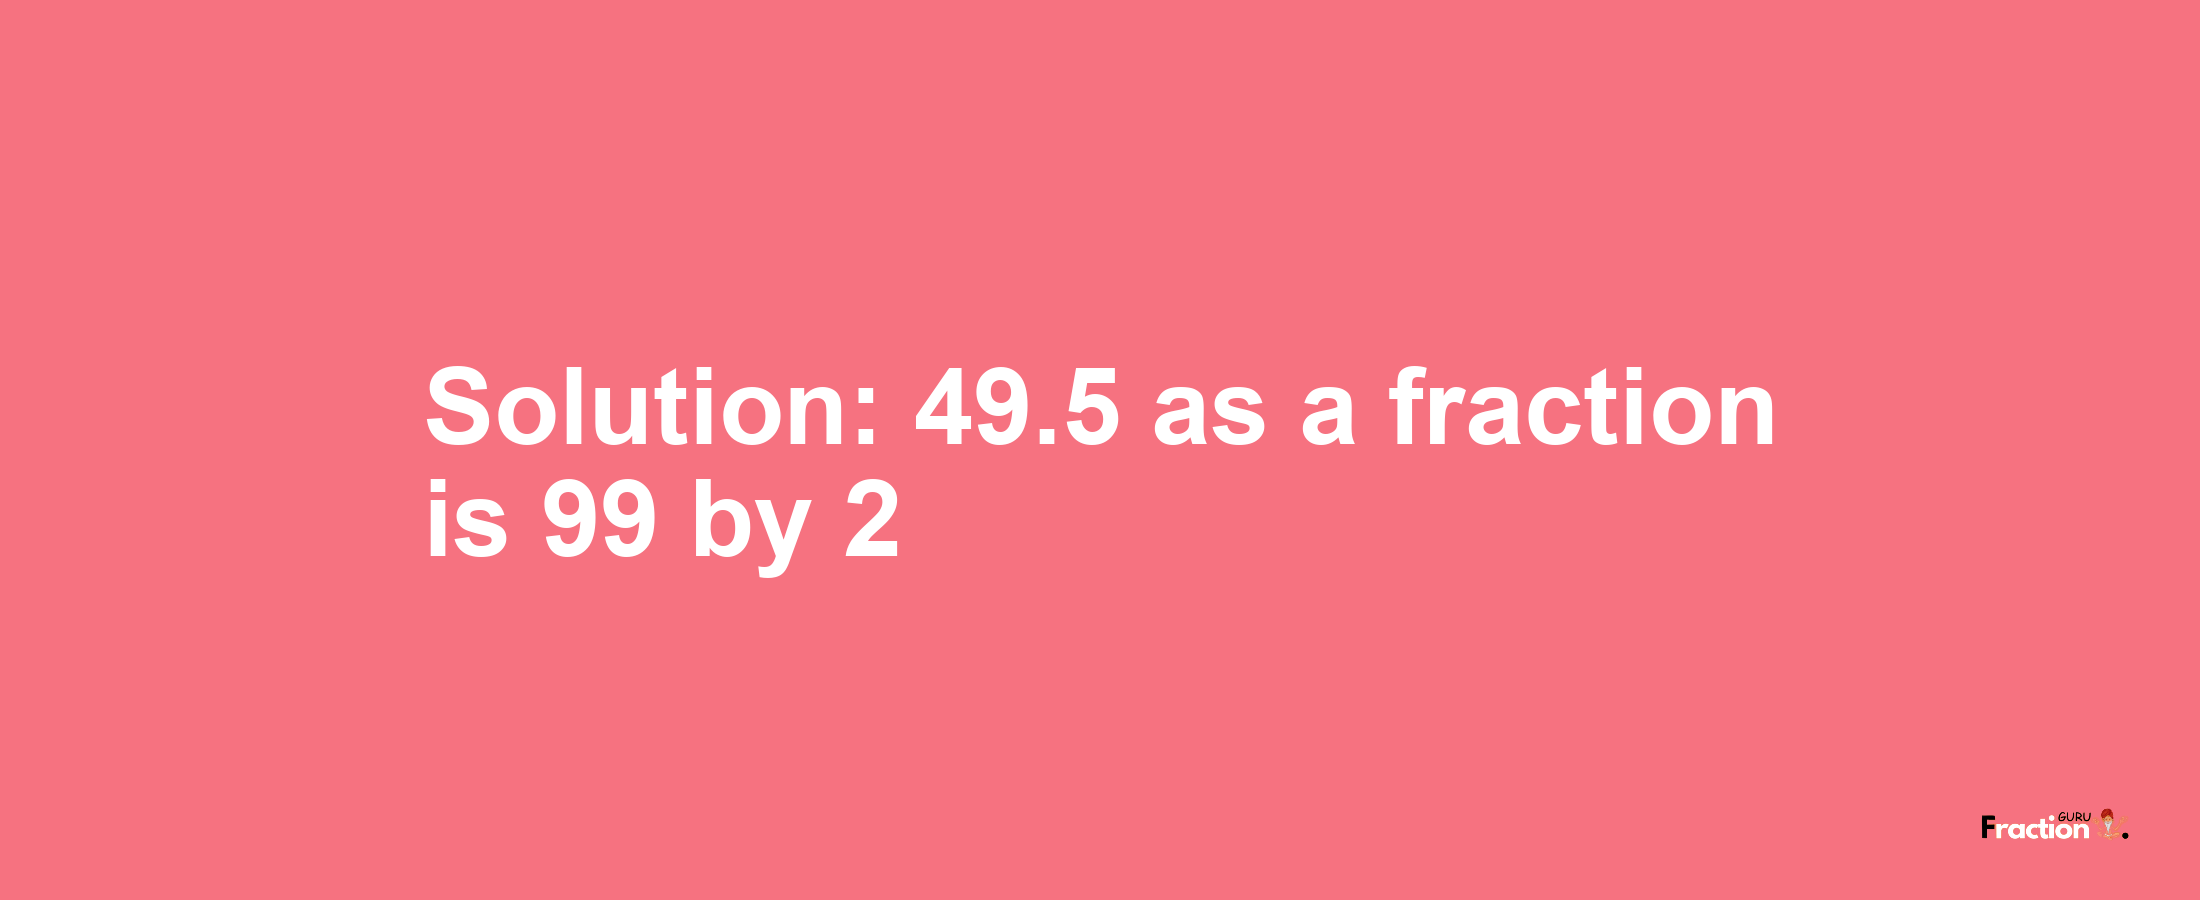 Solution:49.5 as a fraction is 99/2